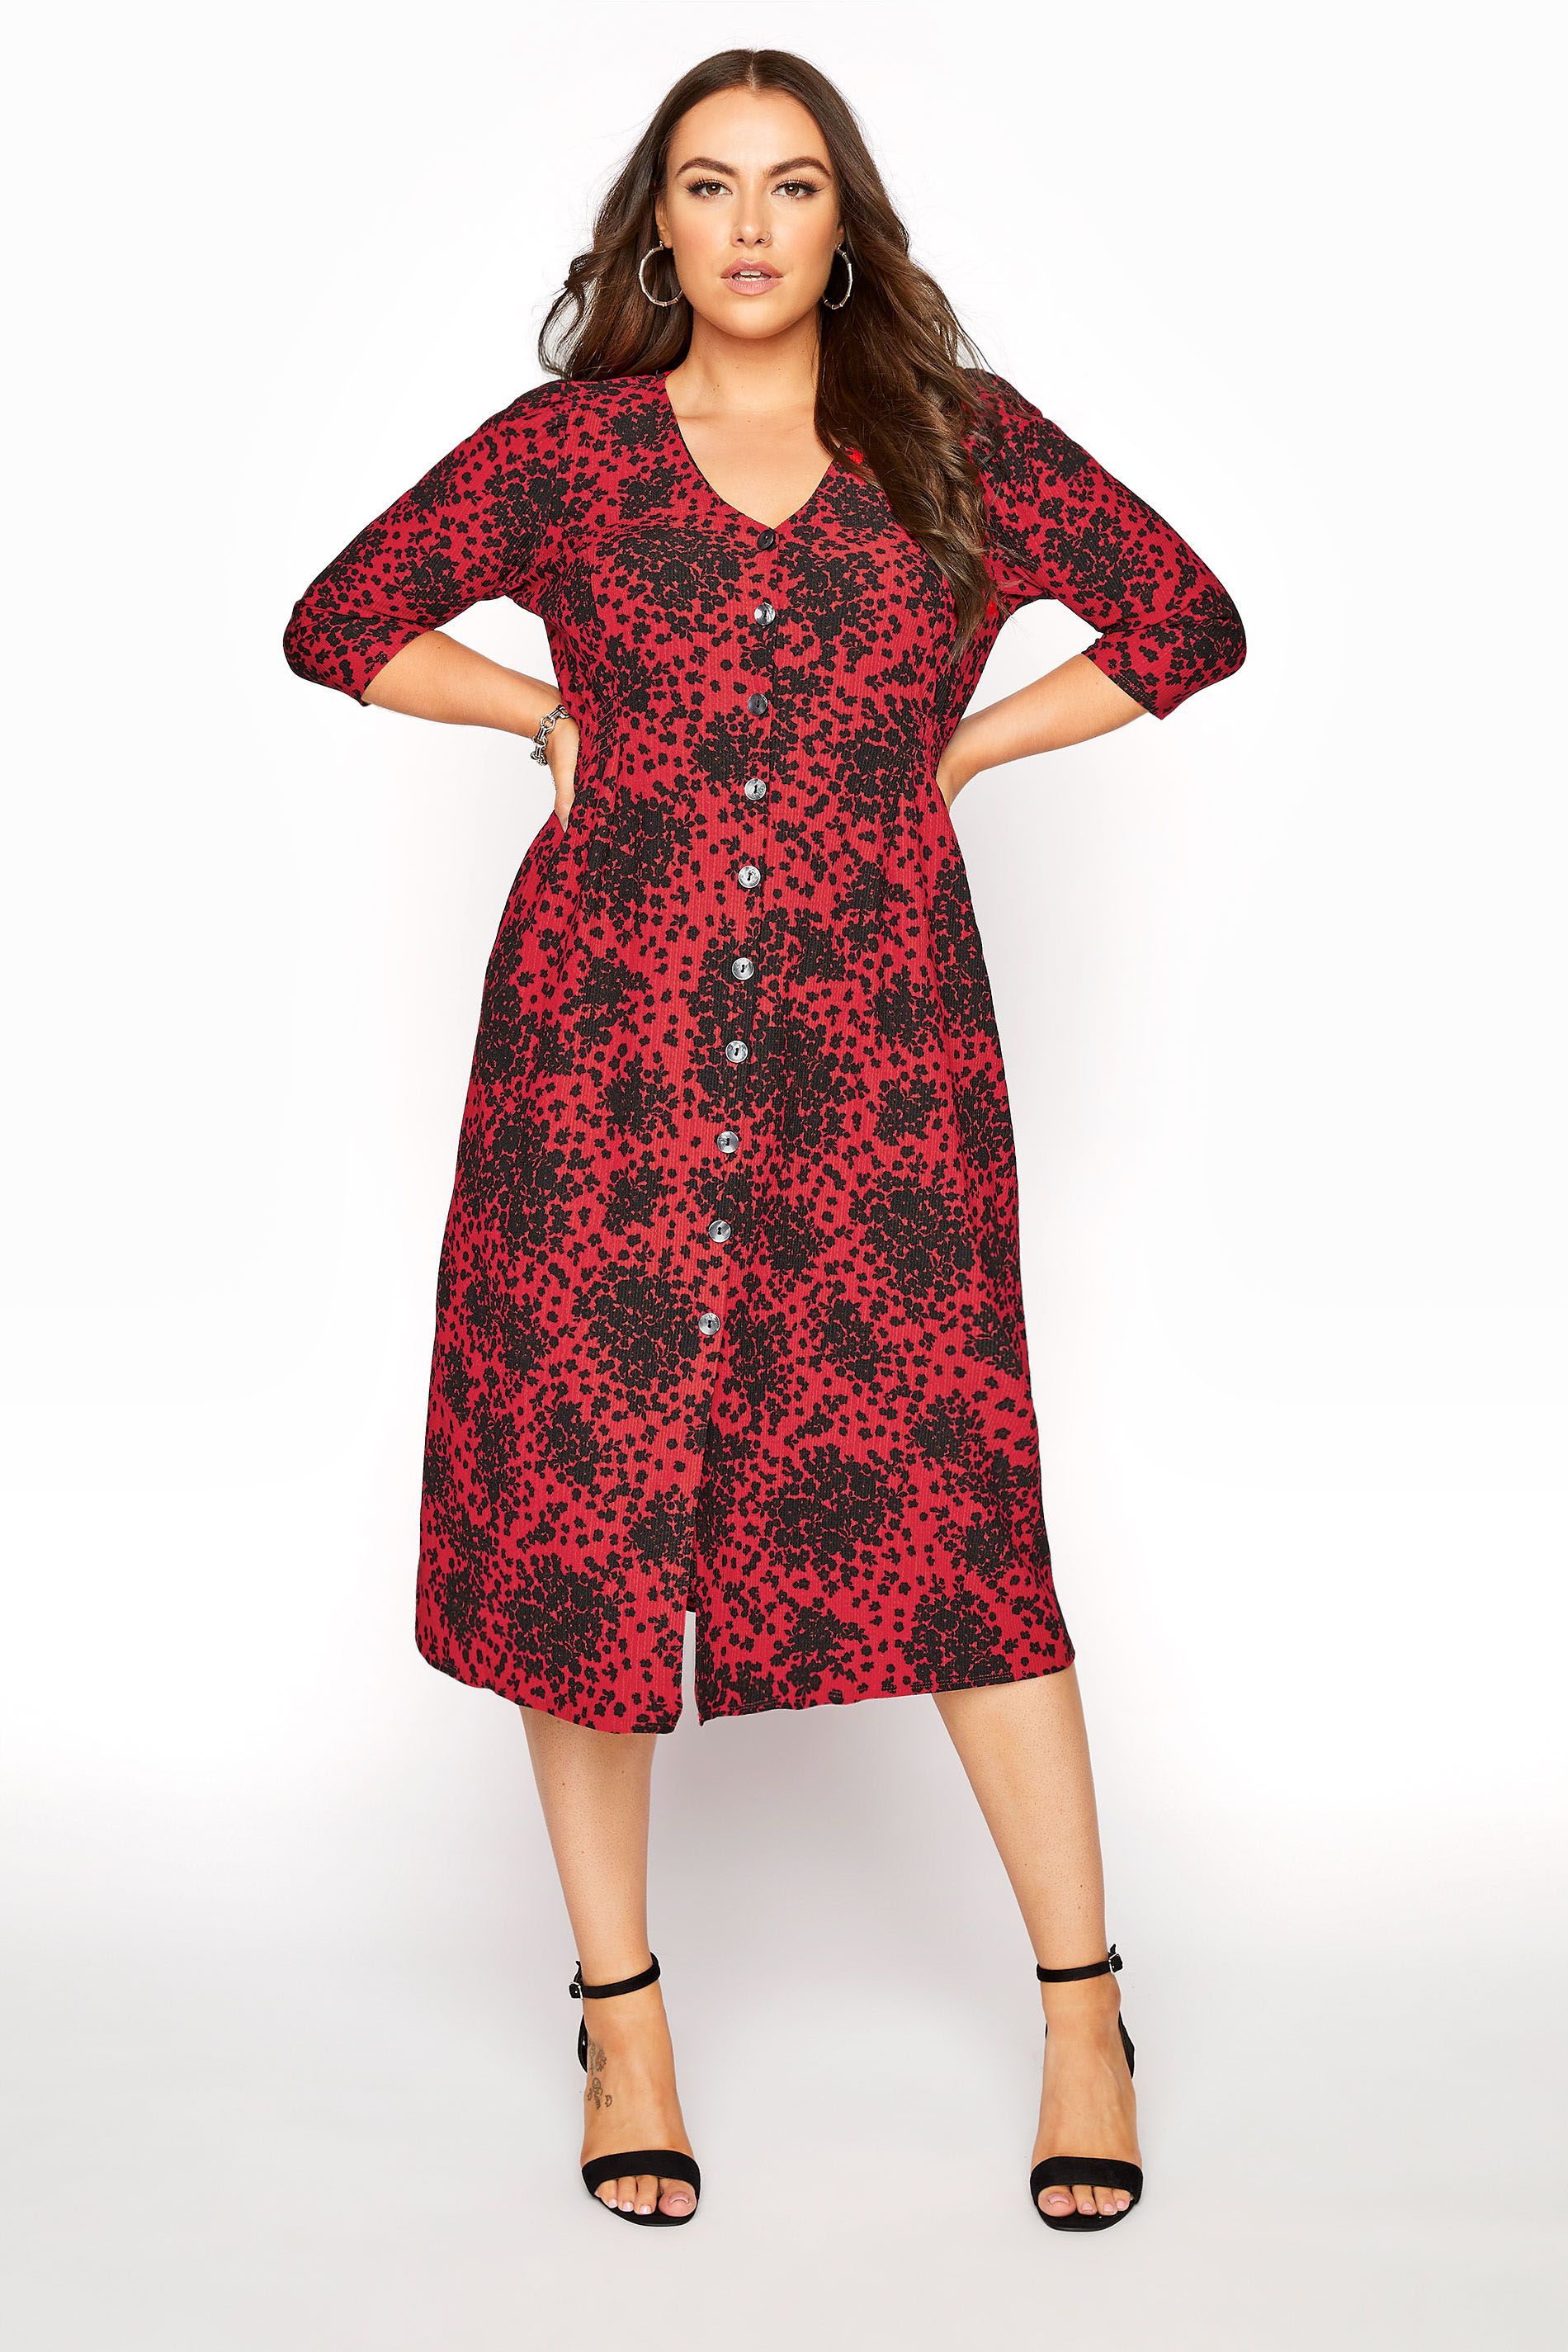 Robes Grande Taille Grande taille  Robes Manches Longues | YOURS LONDON - Robe Rouge Petites Fleurs - BB10241